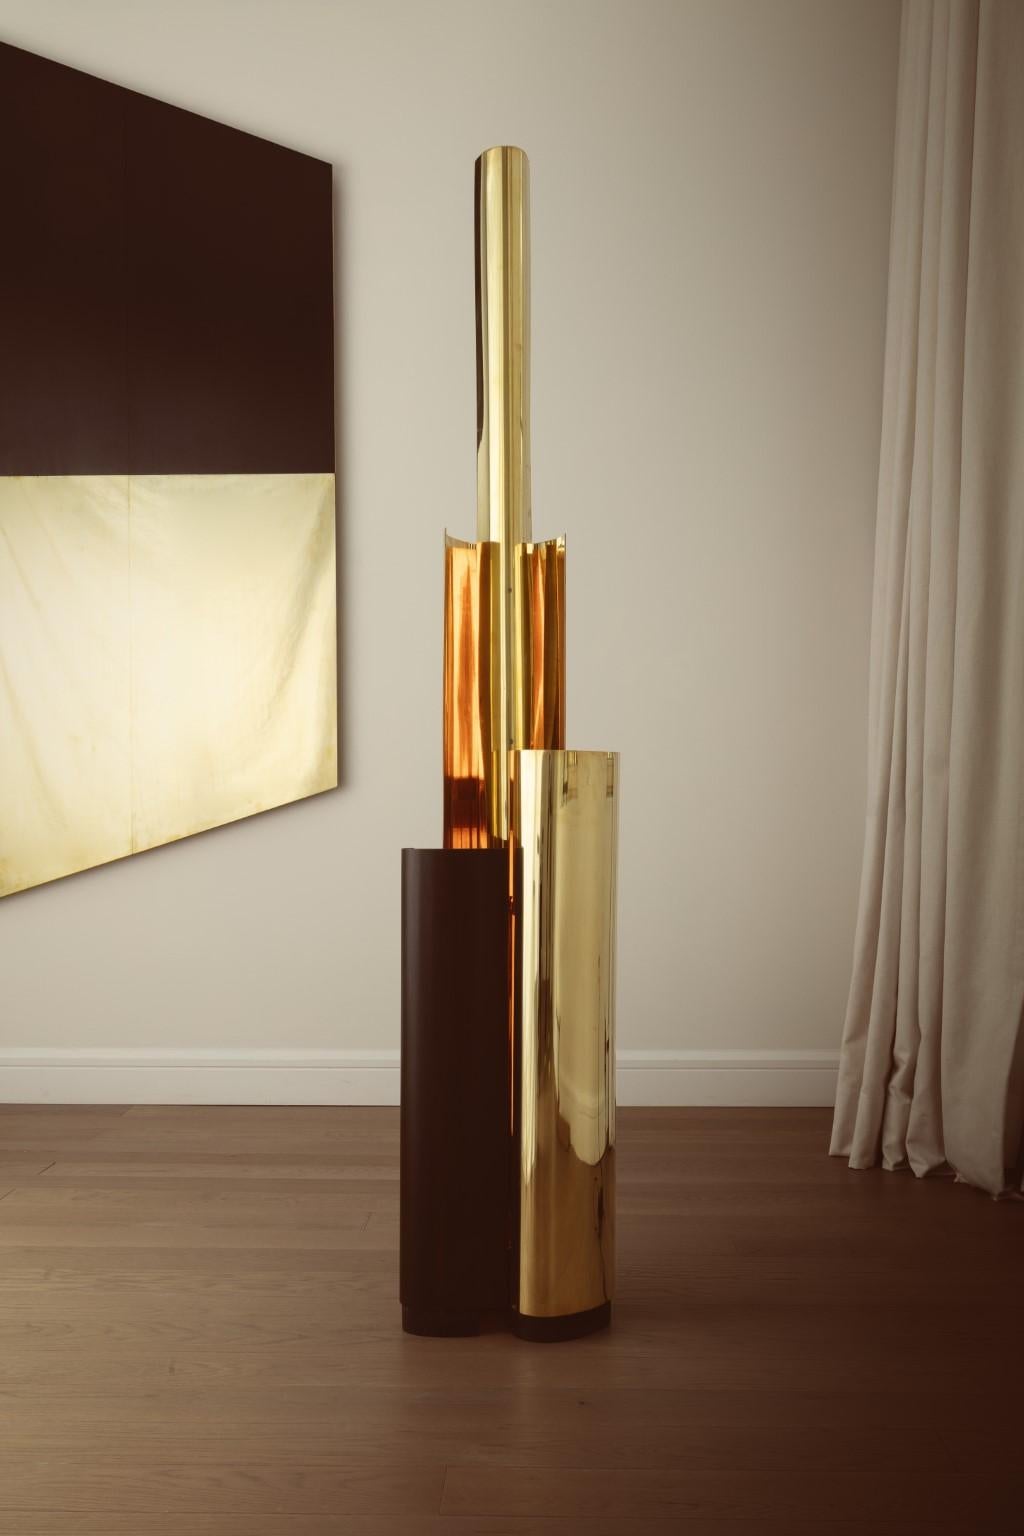 Firo sculptural Lamp by Atra Design
Dimensions: H 150 cm
Materials: brass, steel

Atra Design
We are Atra, a furniture brand produced by Atra form a mexico city–based high end production facility that also houses our founder Alexander Díaz